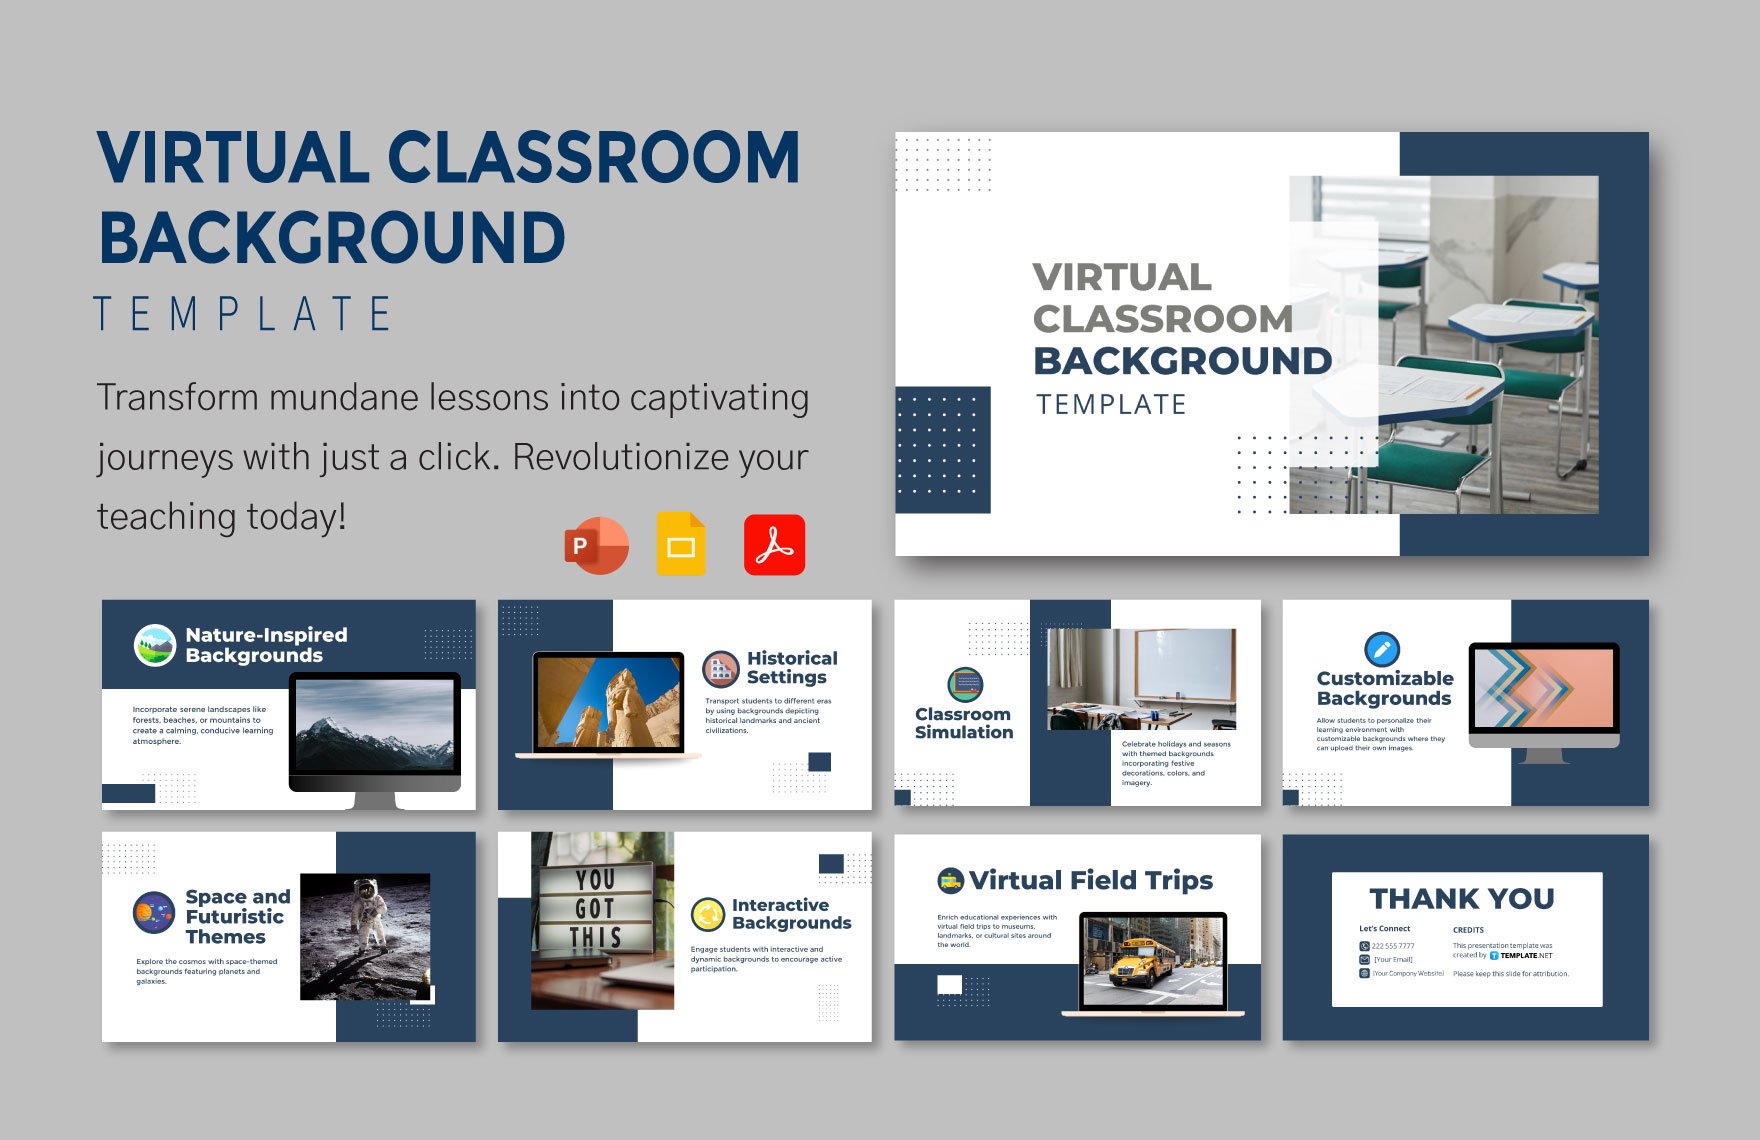 Virtual Classroom Background Template